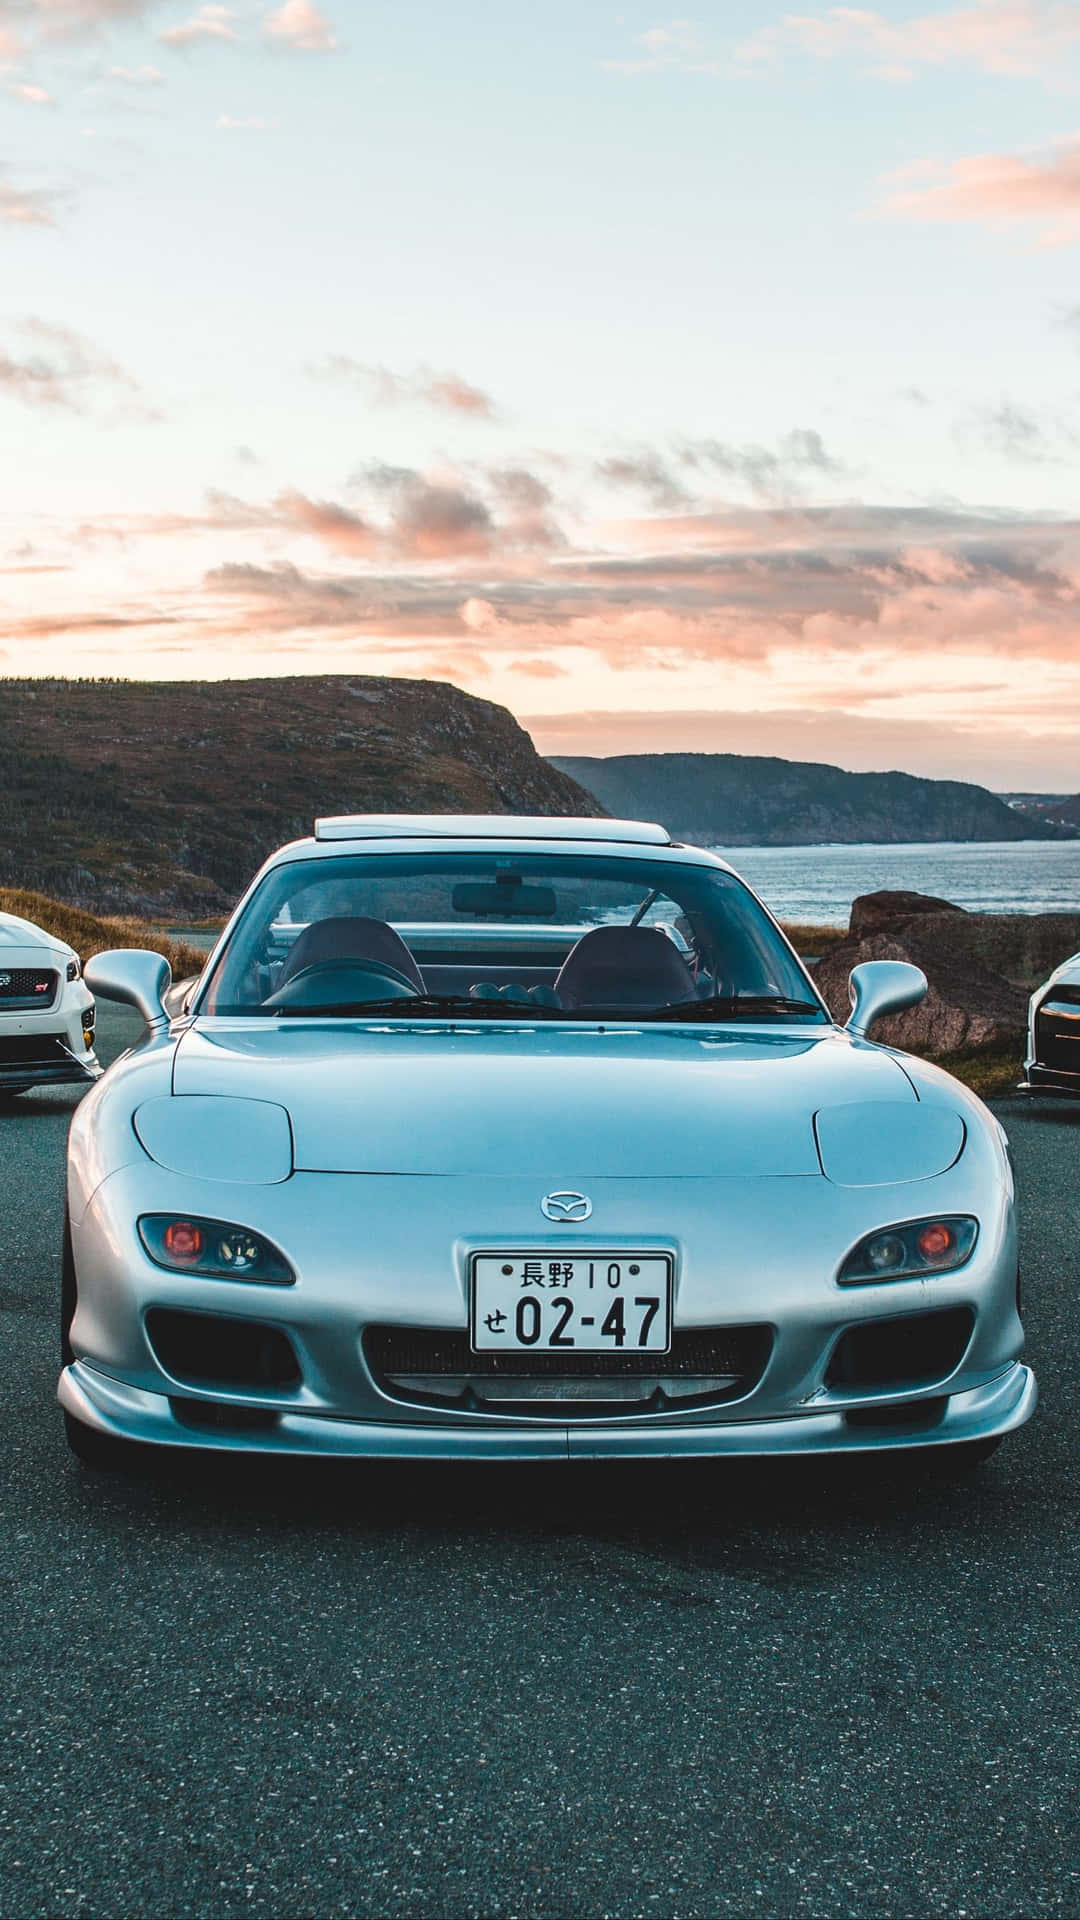 Silver Mazda Rx 7 With Aesthetic Sky Portrait Background